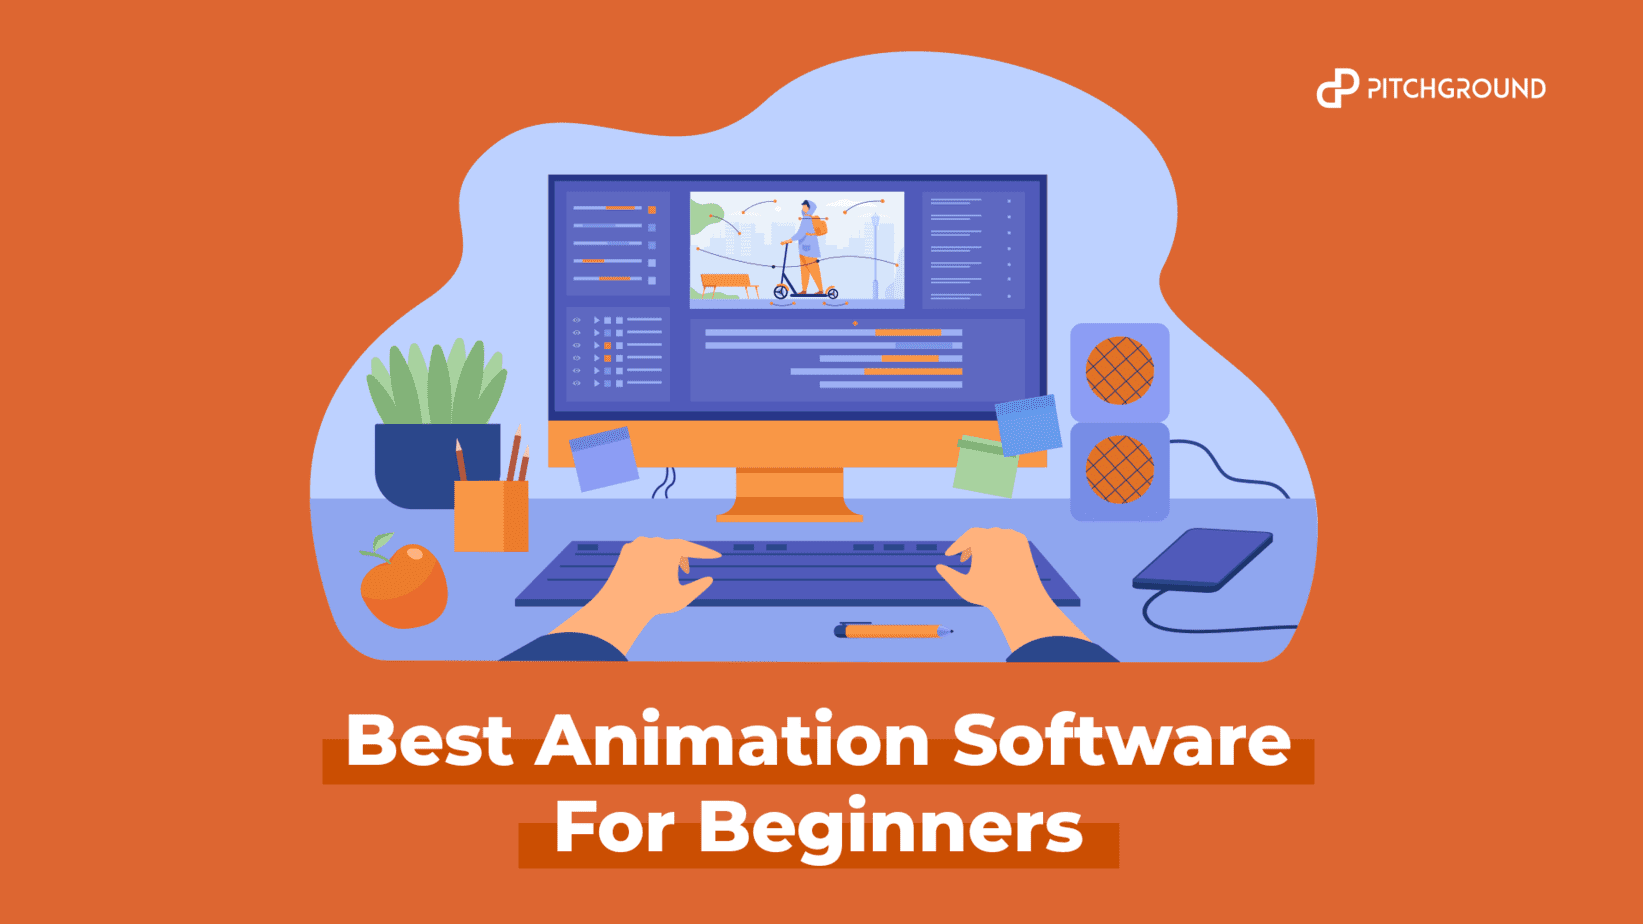 10 Best Animation Software for Beginners - PitchGround